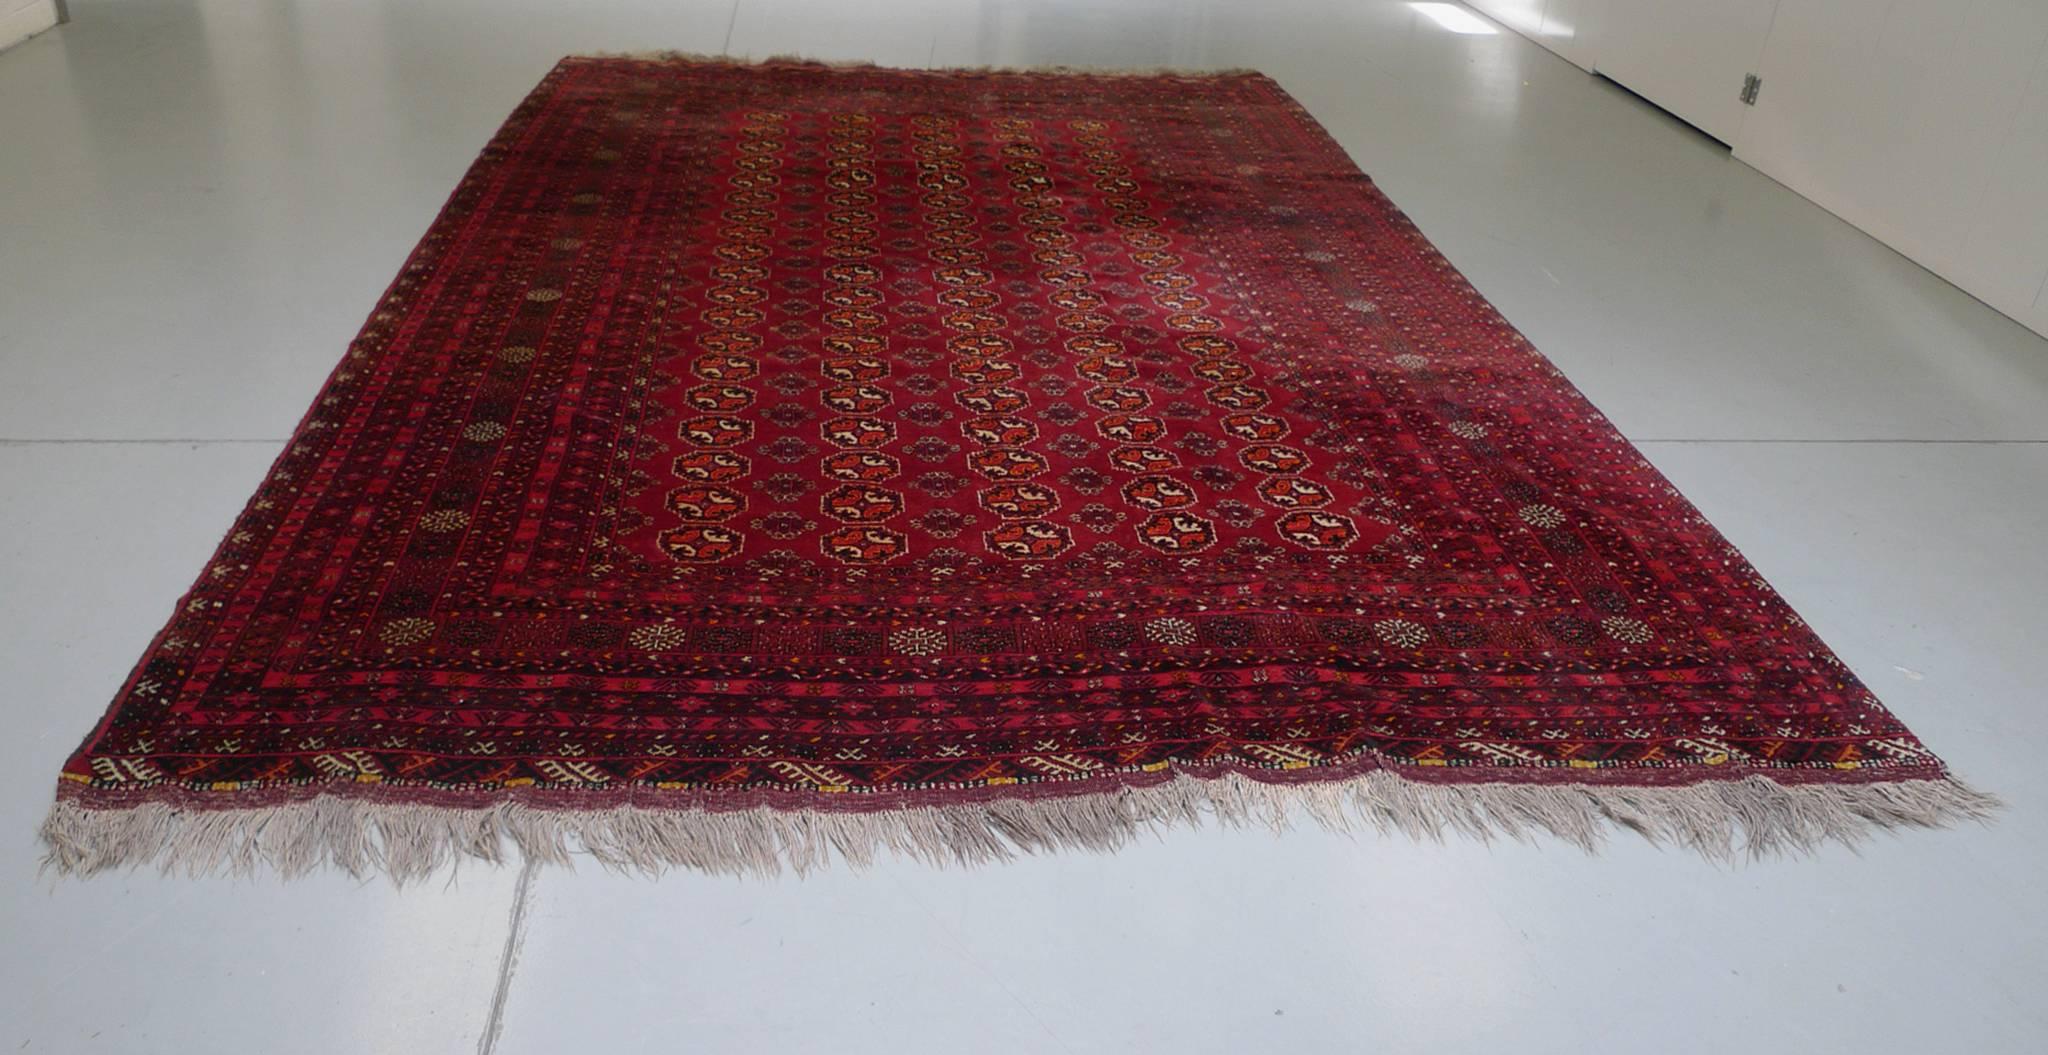 This vintage Bokhara rug was handwoven in the Mid-20th Century. Its palette is a dense mixture of deep, rich reds with ivory, blue, and orange hues hues. The design consists of five columns of traditional guls at the central rectangle, which is, in